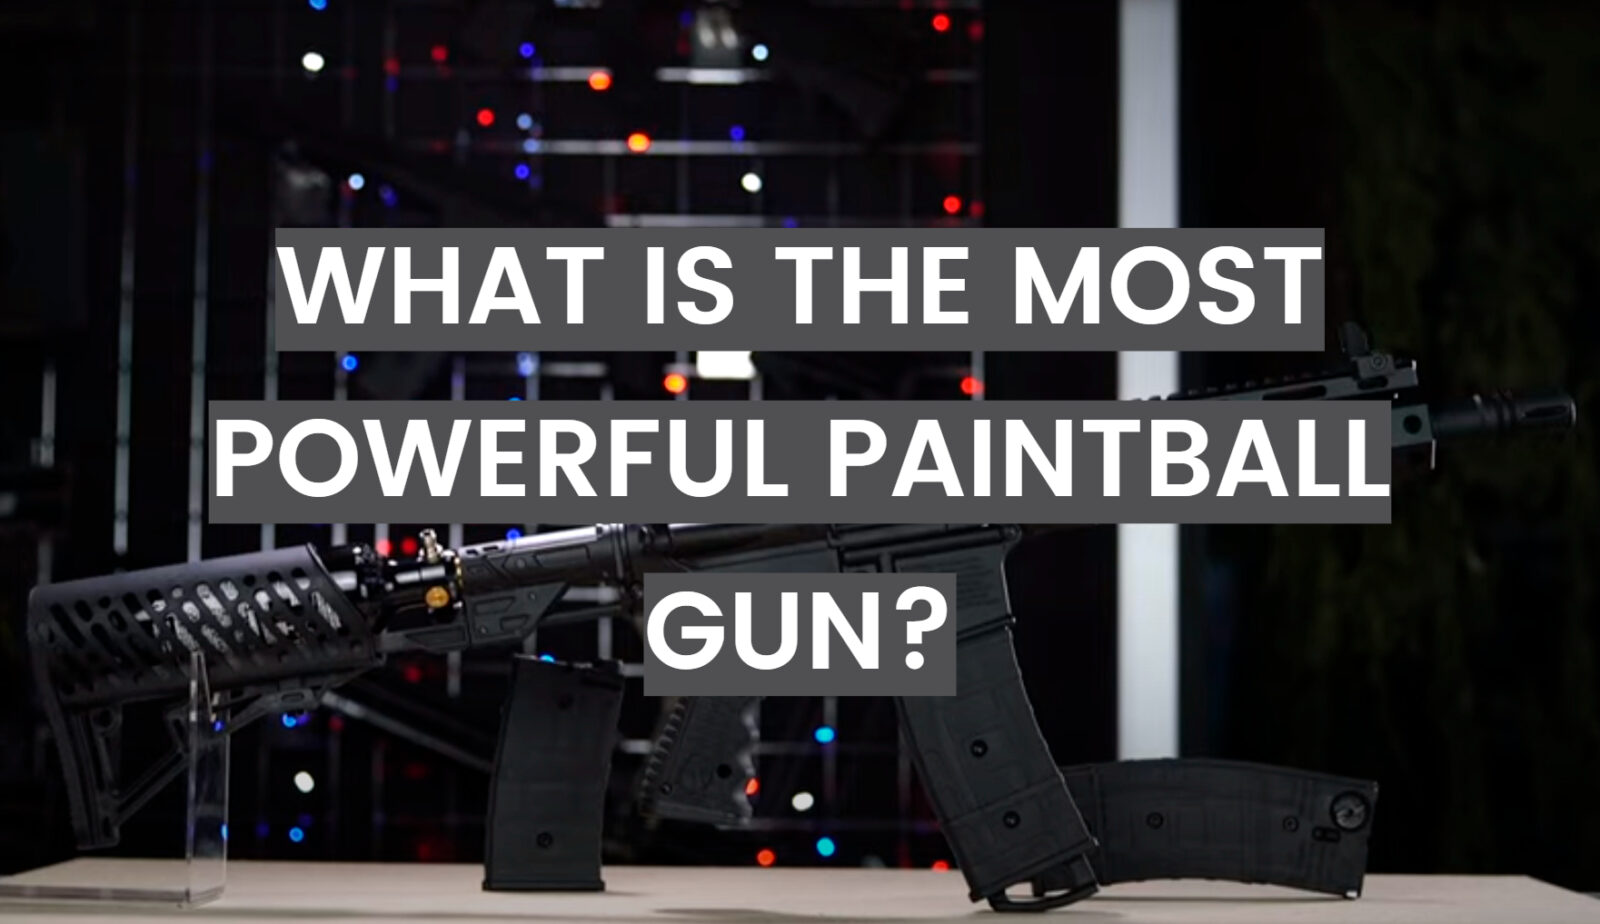 What Is the Most Powerful Paintball Gun?